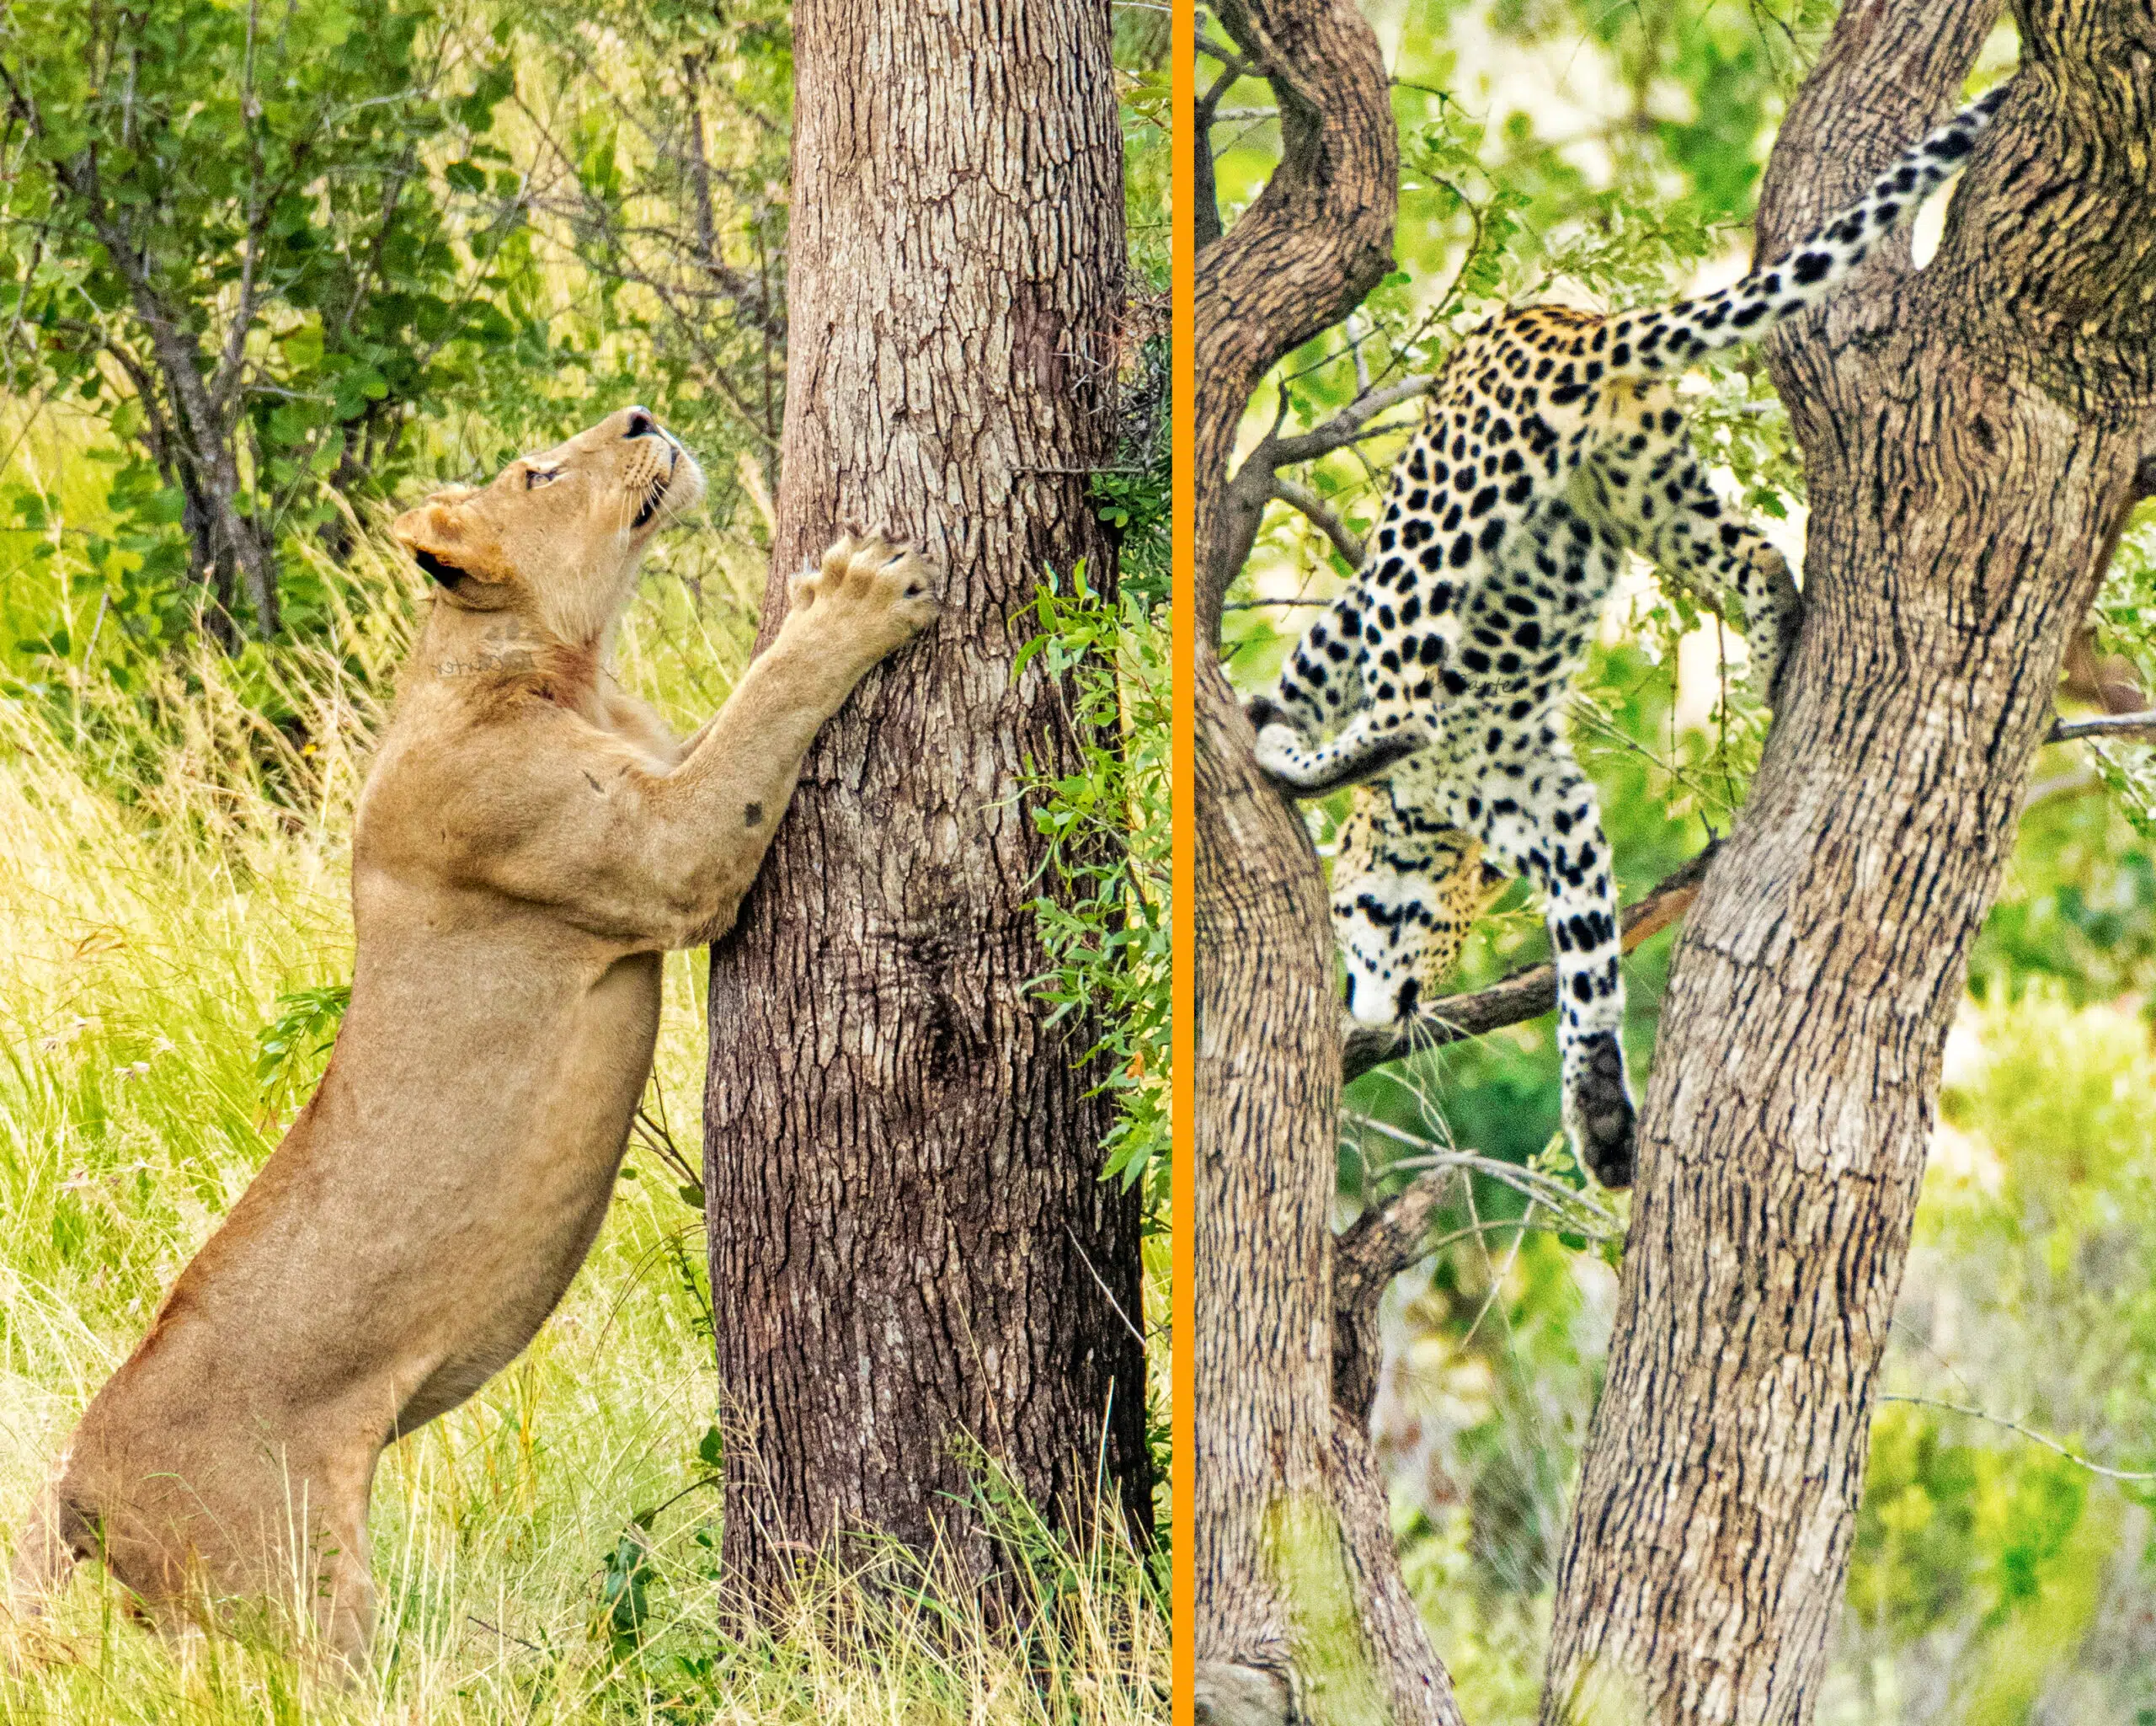 Leopard Chased up a Tree by Hunting Lions